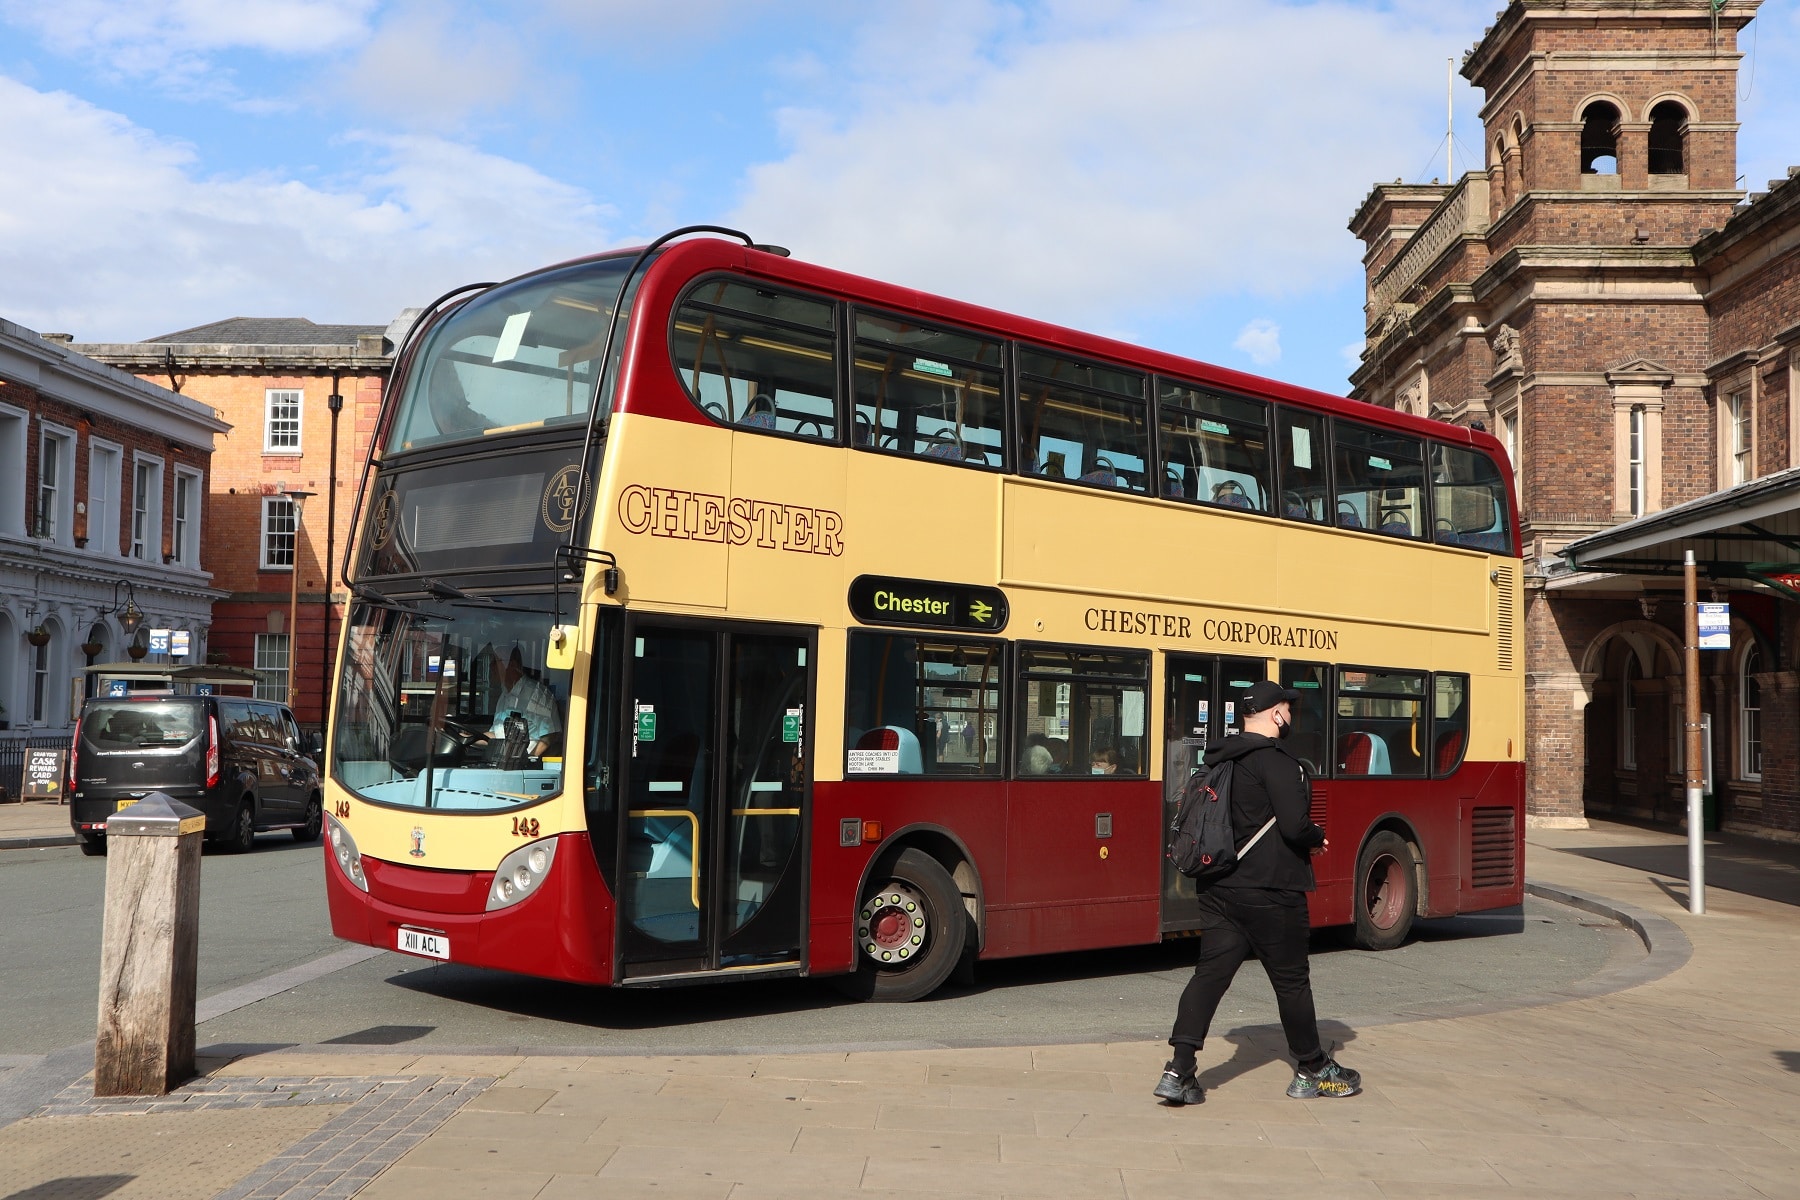 Bus Recovery Grant in England expanded